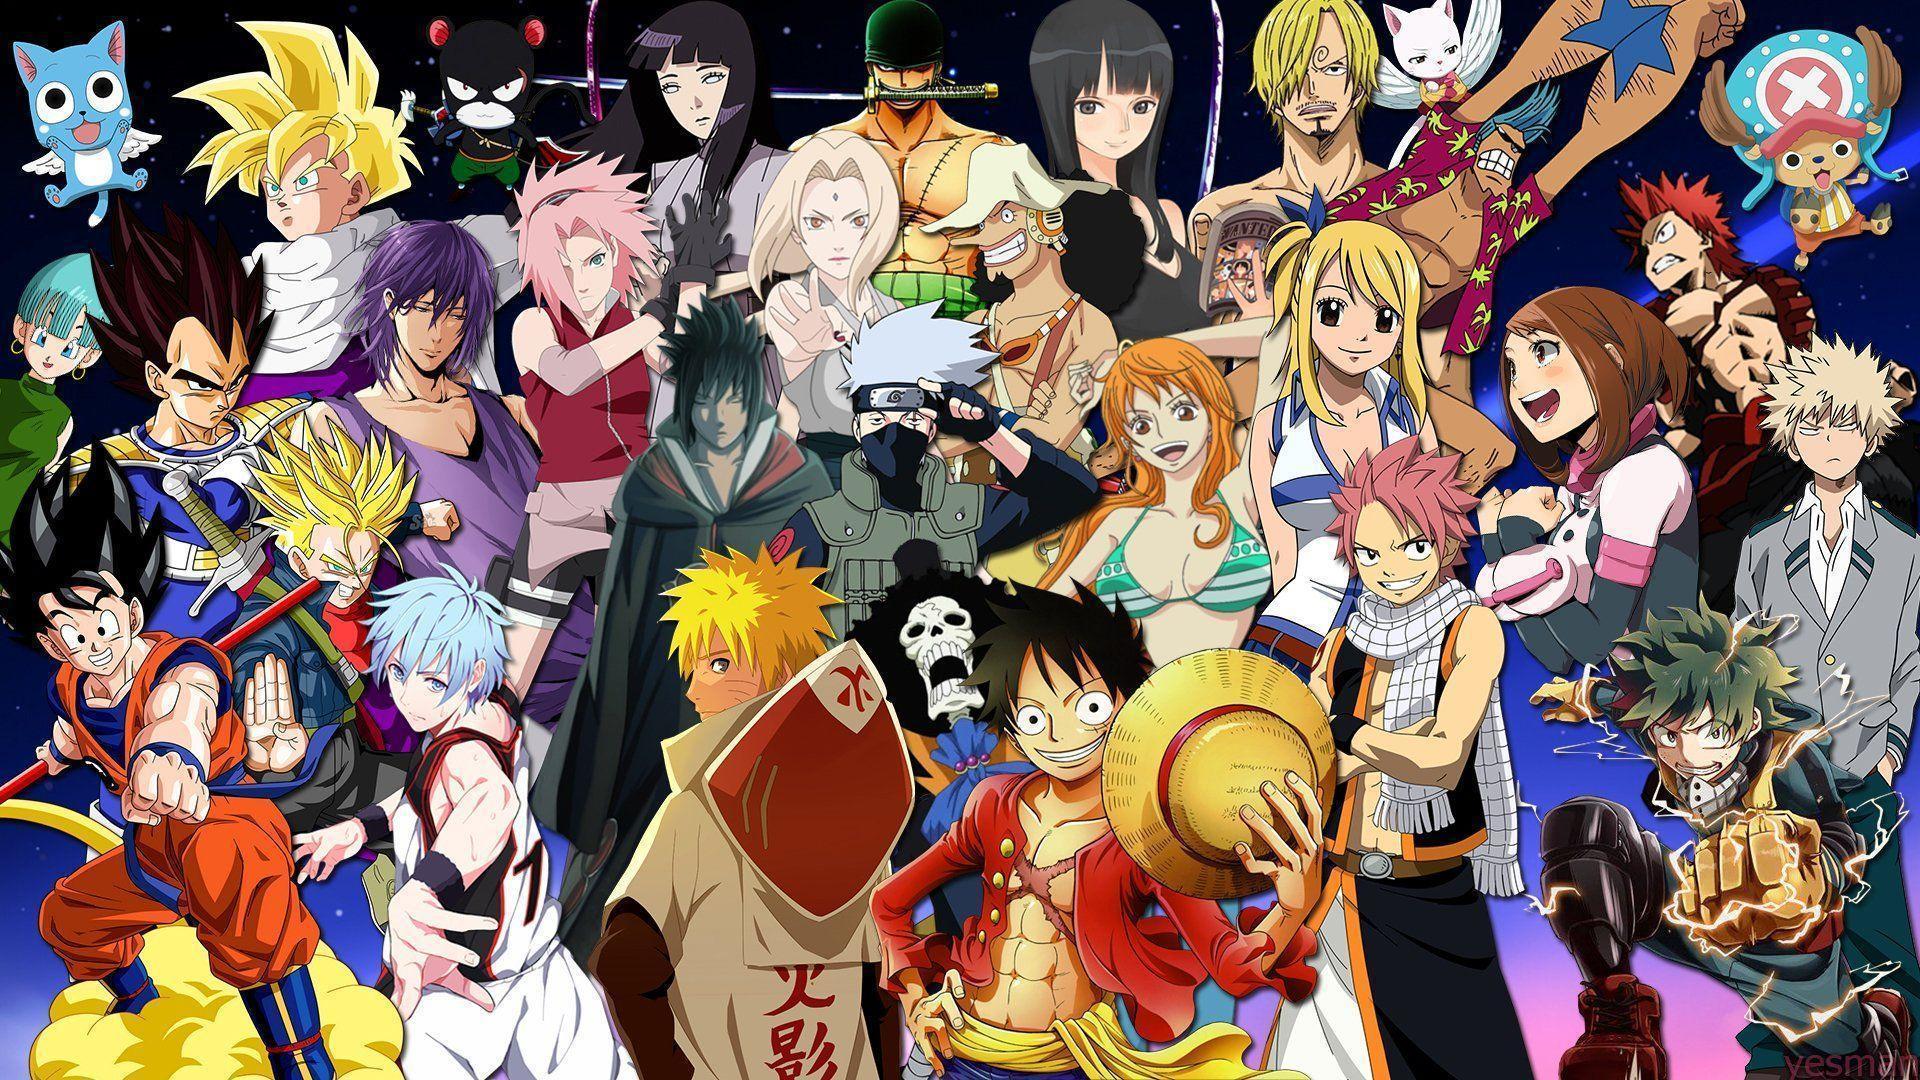 Anime One Piece And Naruto Wallpapers - Wallpaper Cave